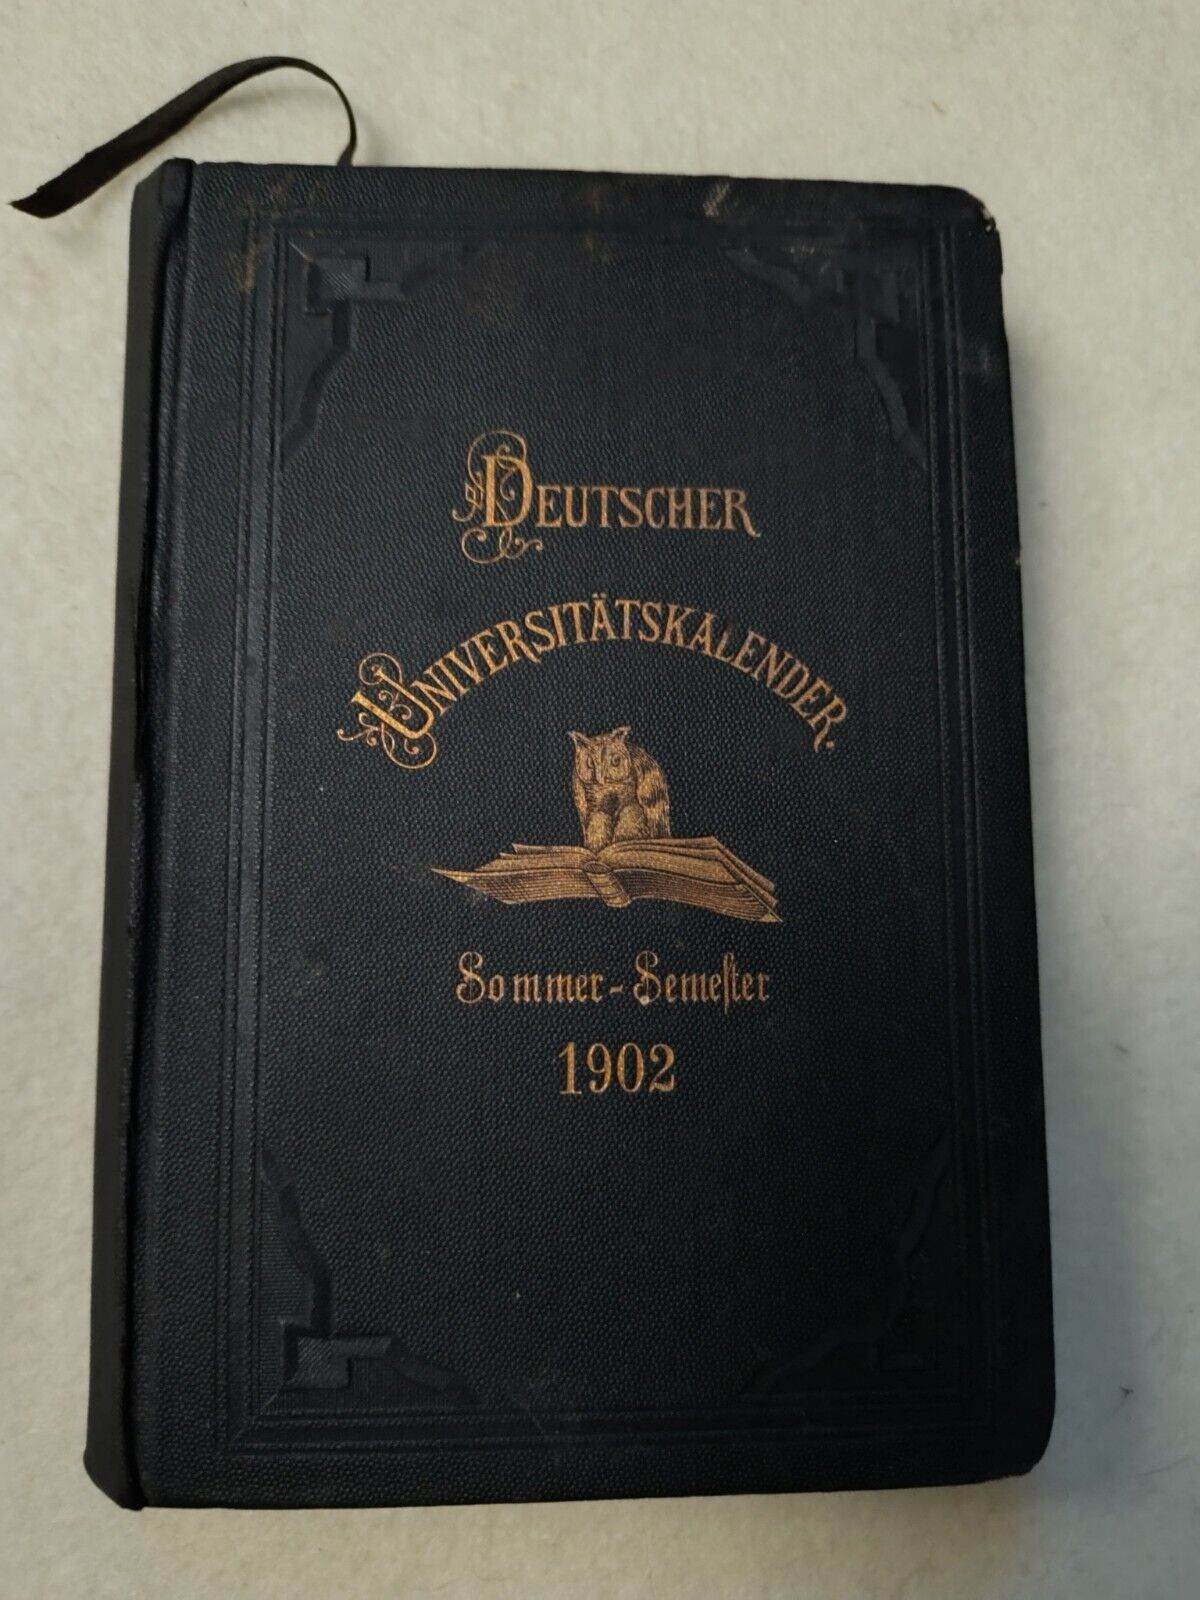 1902 ANTIQUE GERMAN BOOK (fully Intact) 6x8